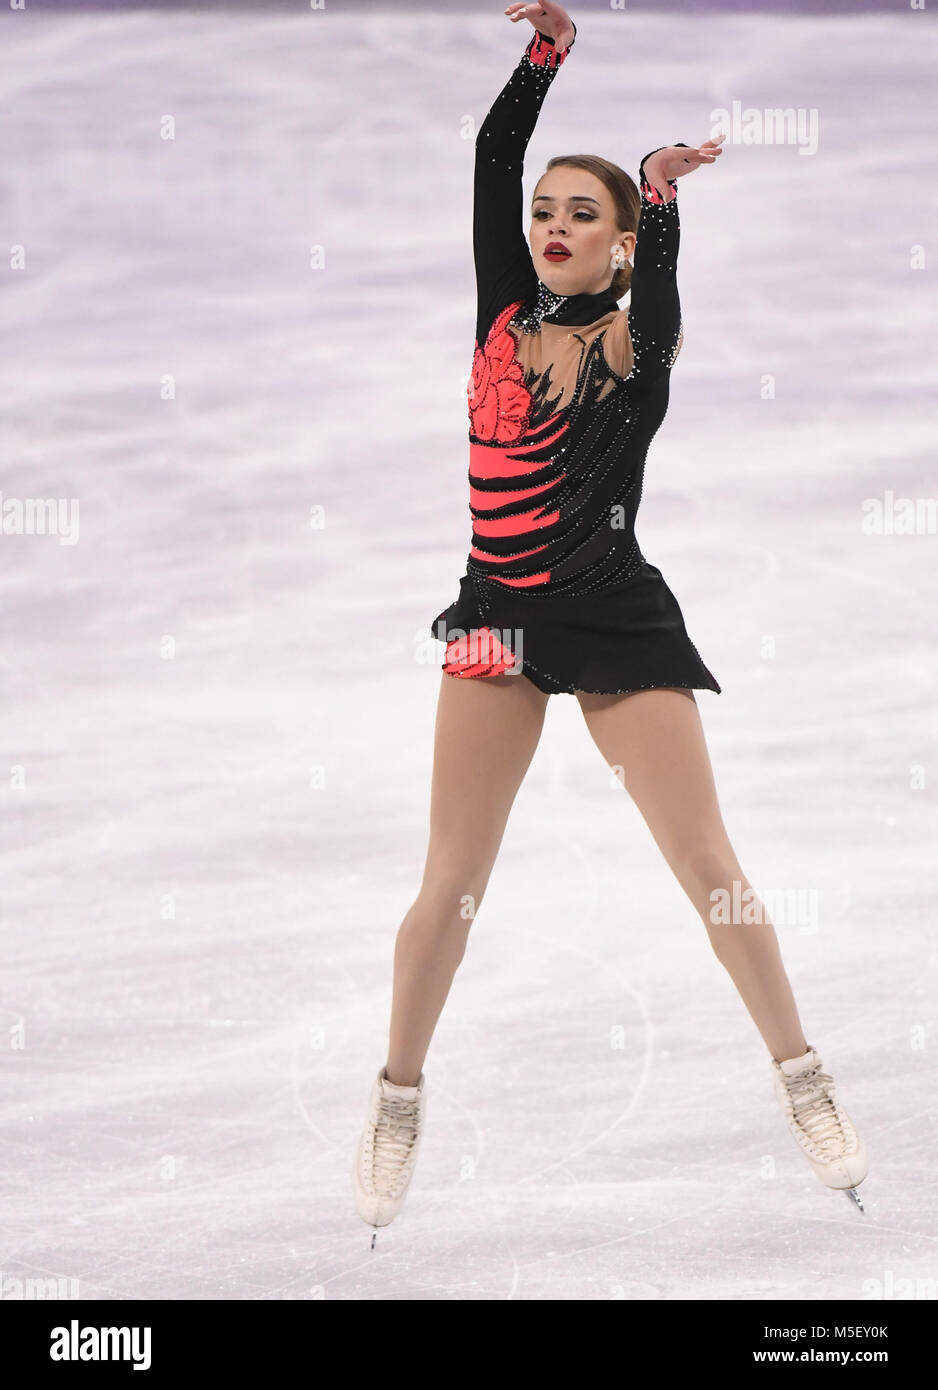 Pyeongchang, South Korea. 23rd Feb, 2018. Isadora Williams of Brazil competes during the ladies' single free skating of figure skating at the 2018 PyeongChang Winter Olympic Games, in Gangneung Ice Arena, South Korea, on Feb. 23, 2018. Isadora Williams got the 24th place with 144.18 points in total. Credit: Wang Haofei/Xinhua/Alamy Live News Stock Photo